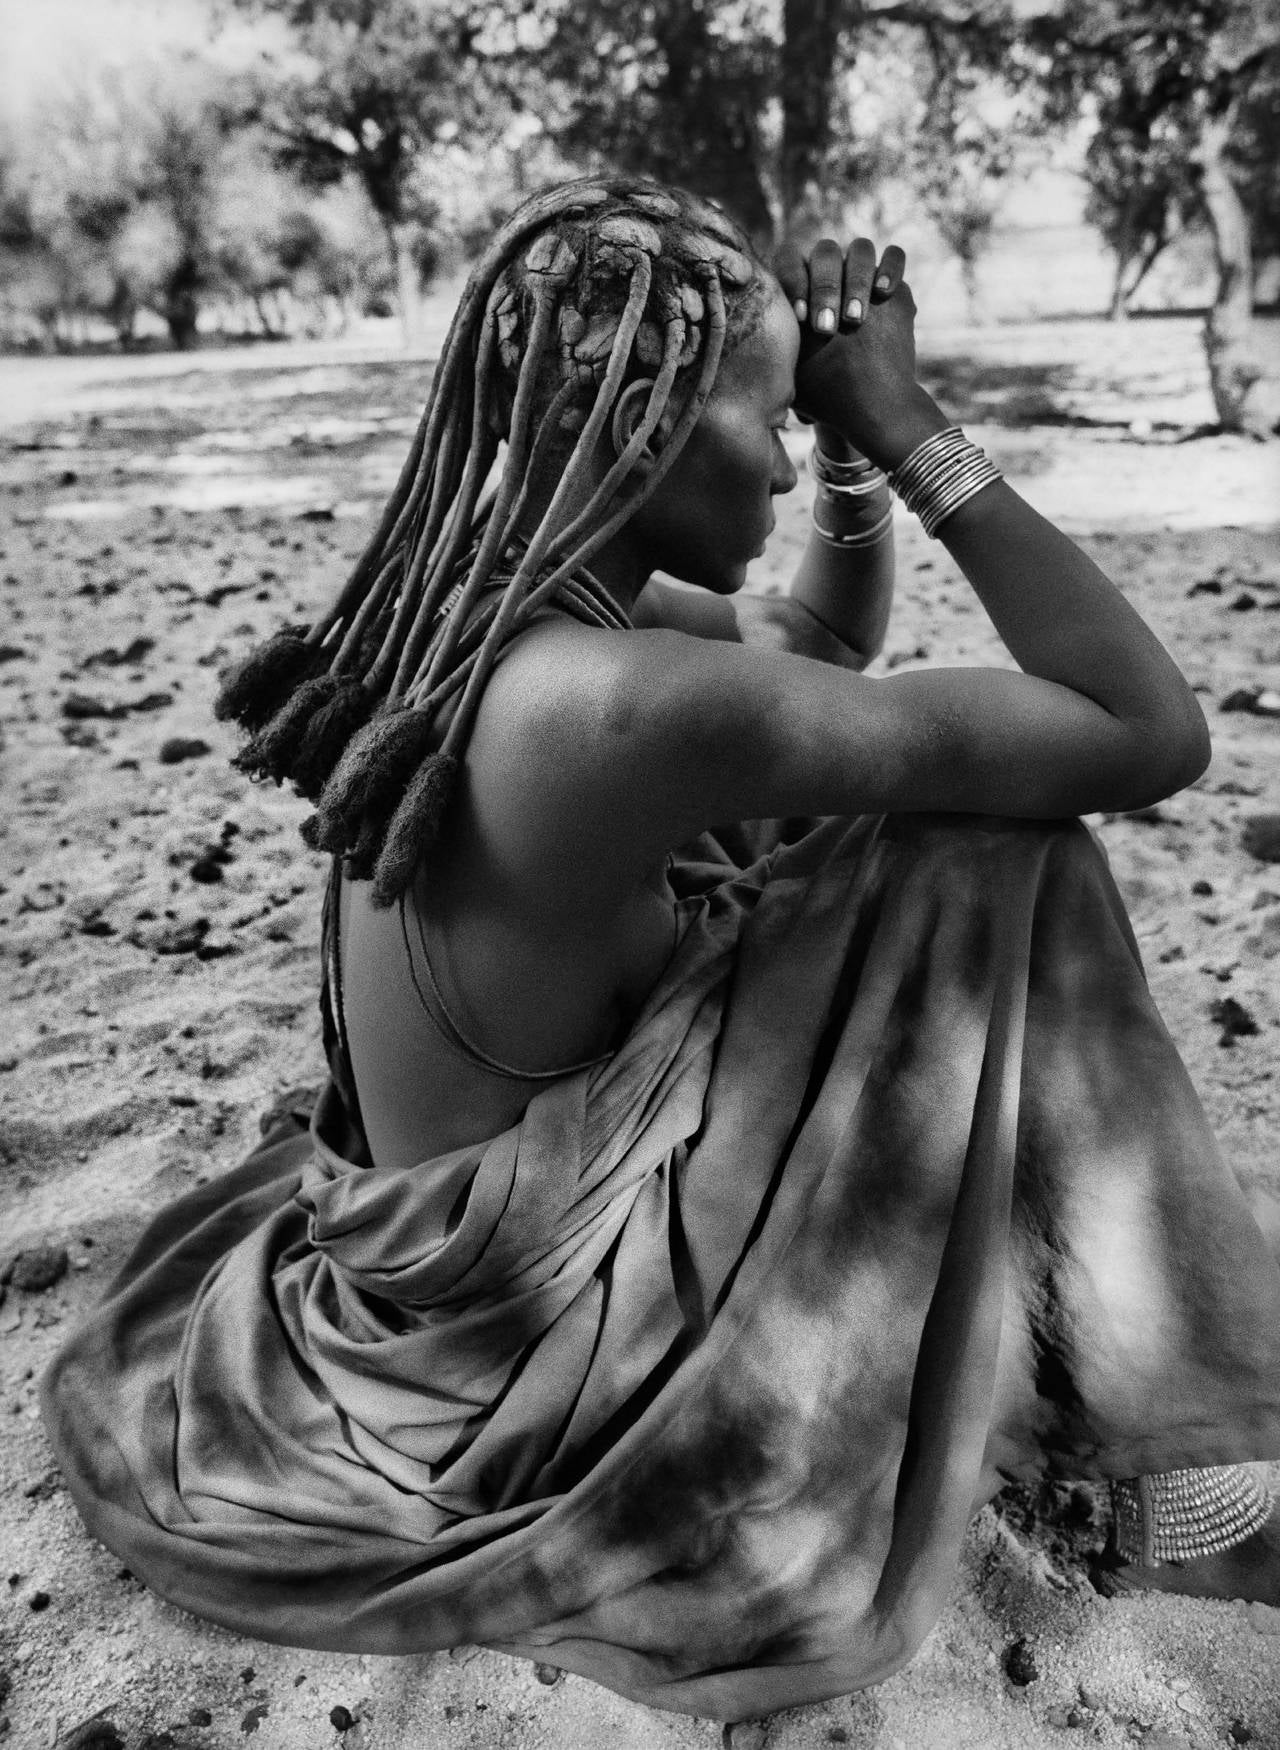 A Himba Woman, Kaokoland, Namibia, 2005
Sebastião Salgado
Stamped with photographer's copyright blind stamp
Signed, inscribed on reverse
Silver gelatin print
16 x 20 inches

Undertaking projects of vast temporal and geographic scope, Sebastião